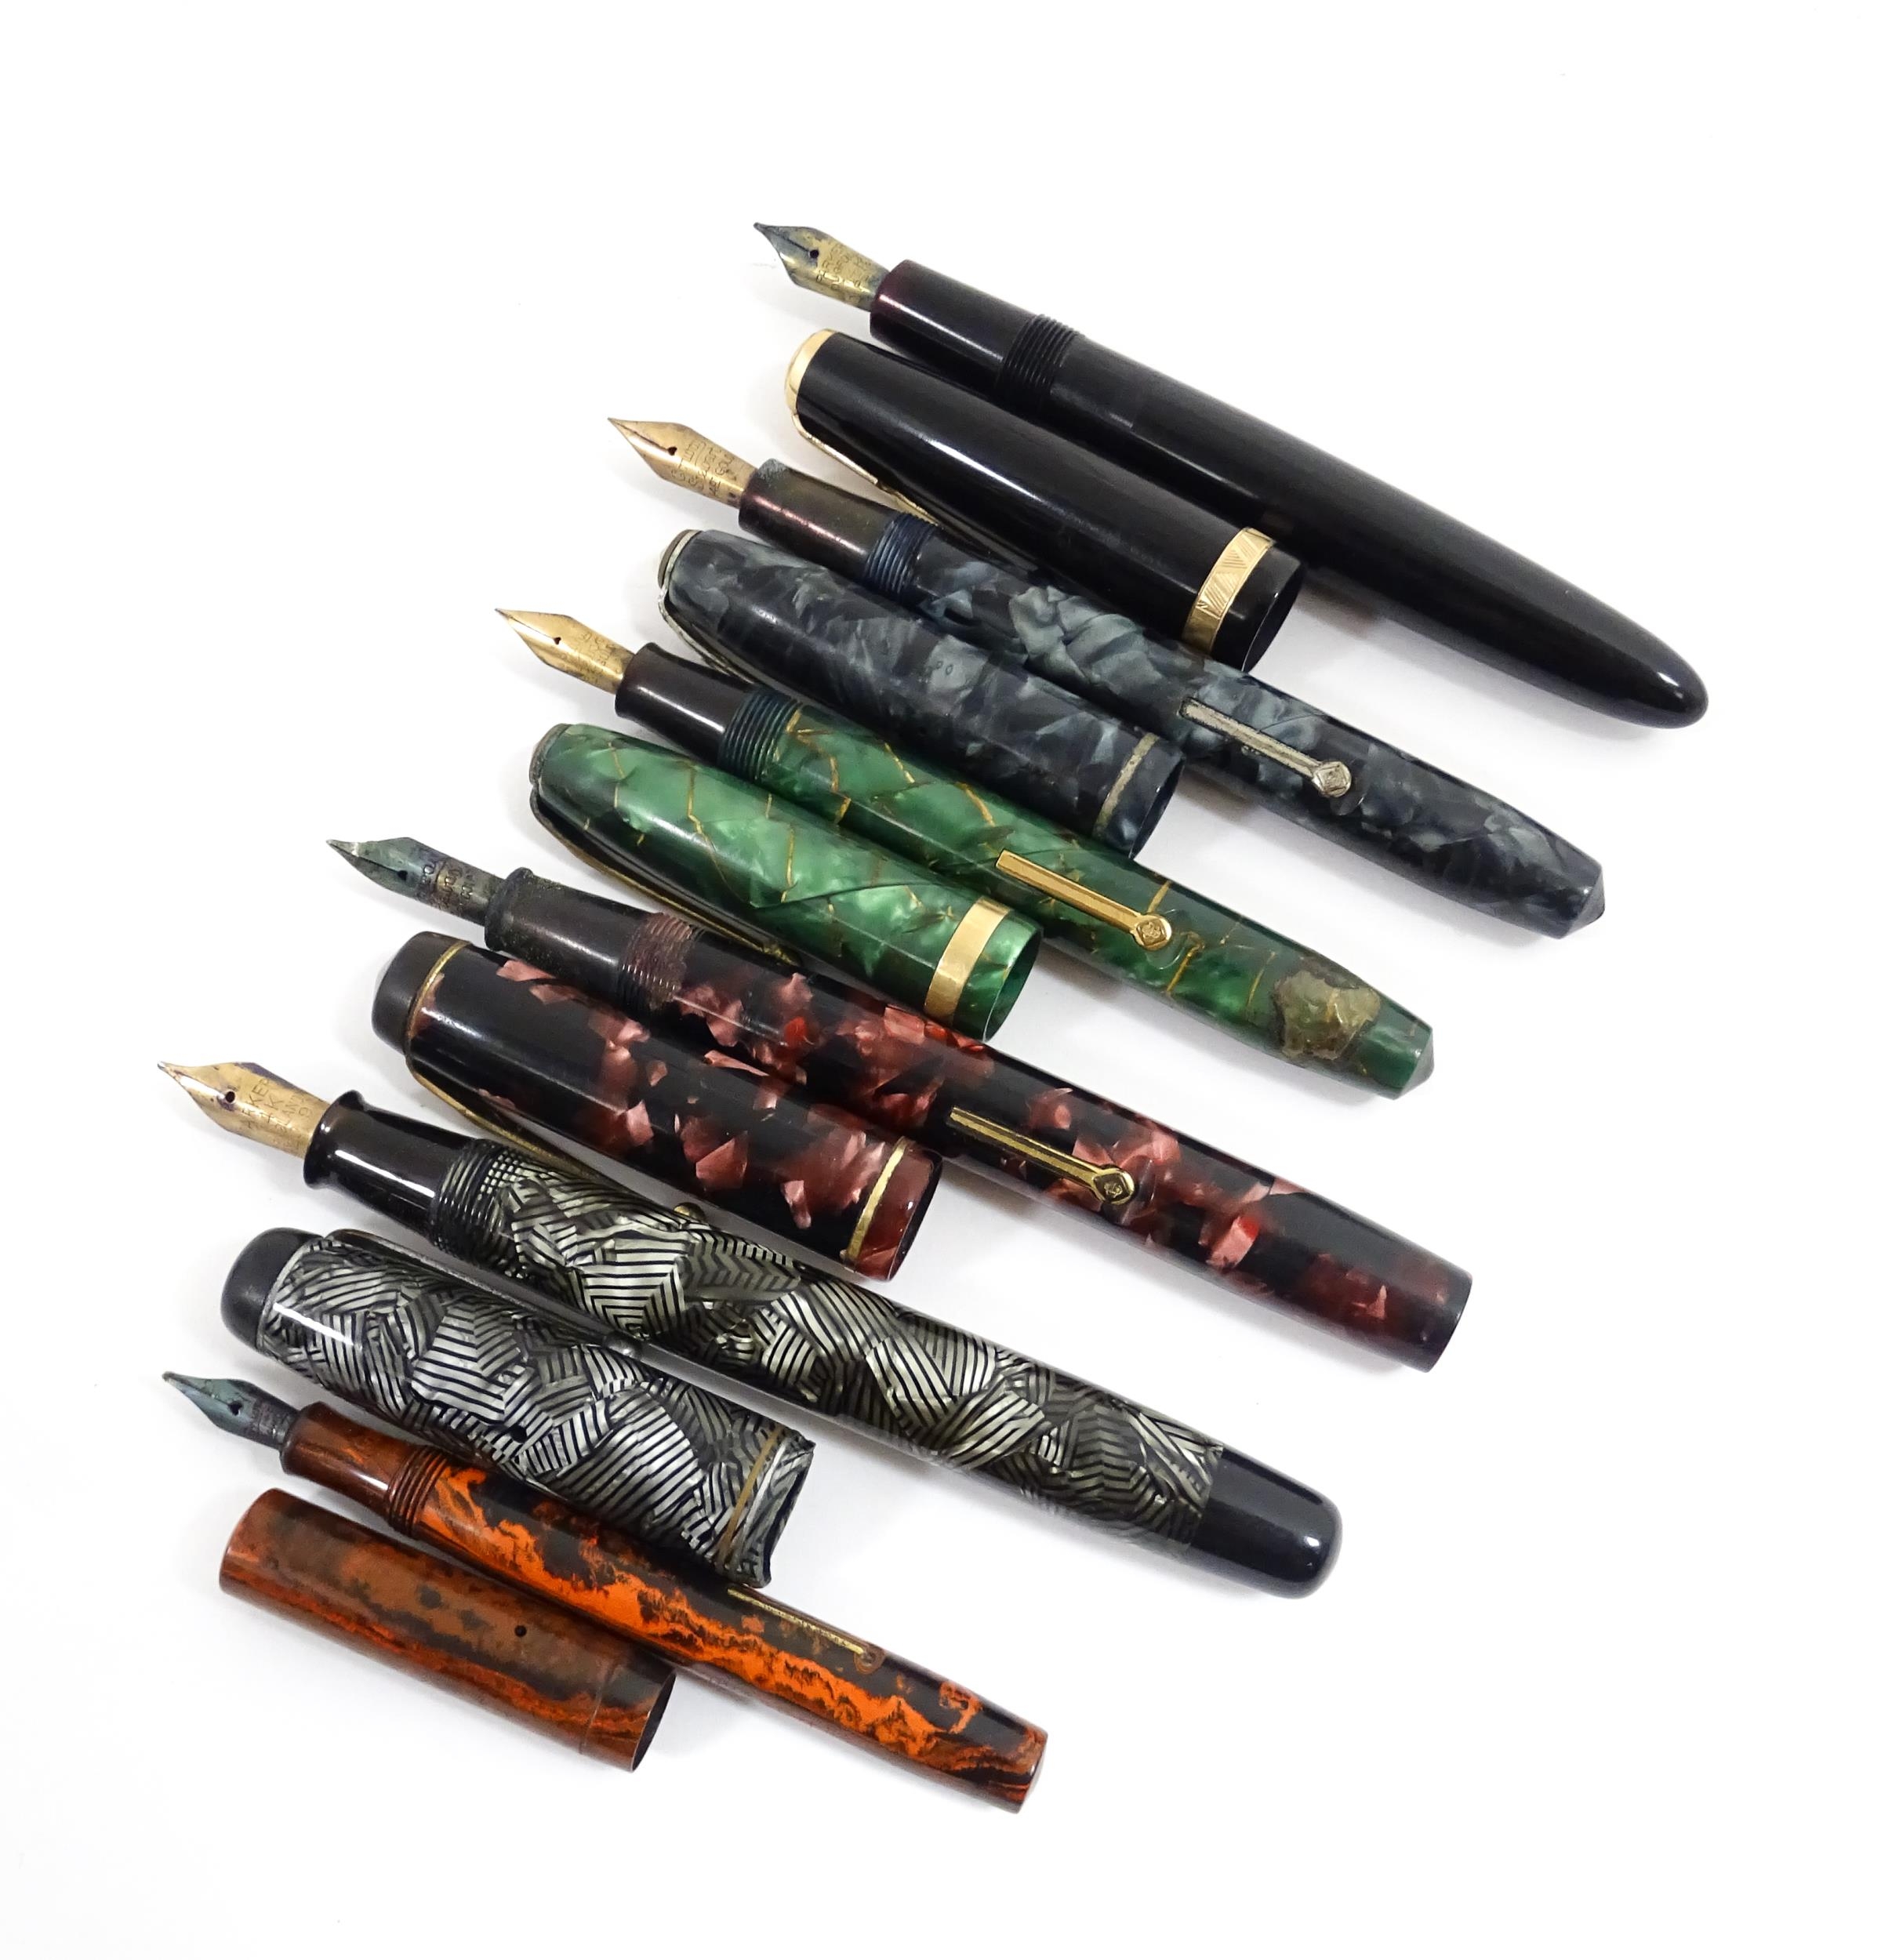 Six fountain pens with 14ct nibs, to include a Parker 'Duofold' with black finish and 14kt gold nib, - Image 5 of 22